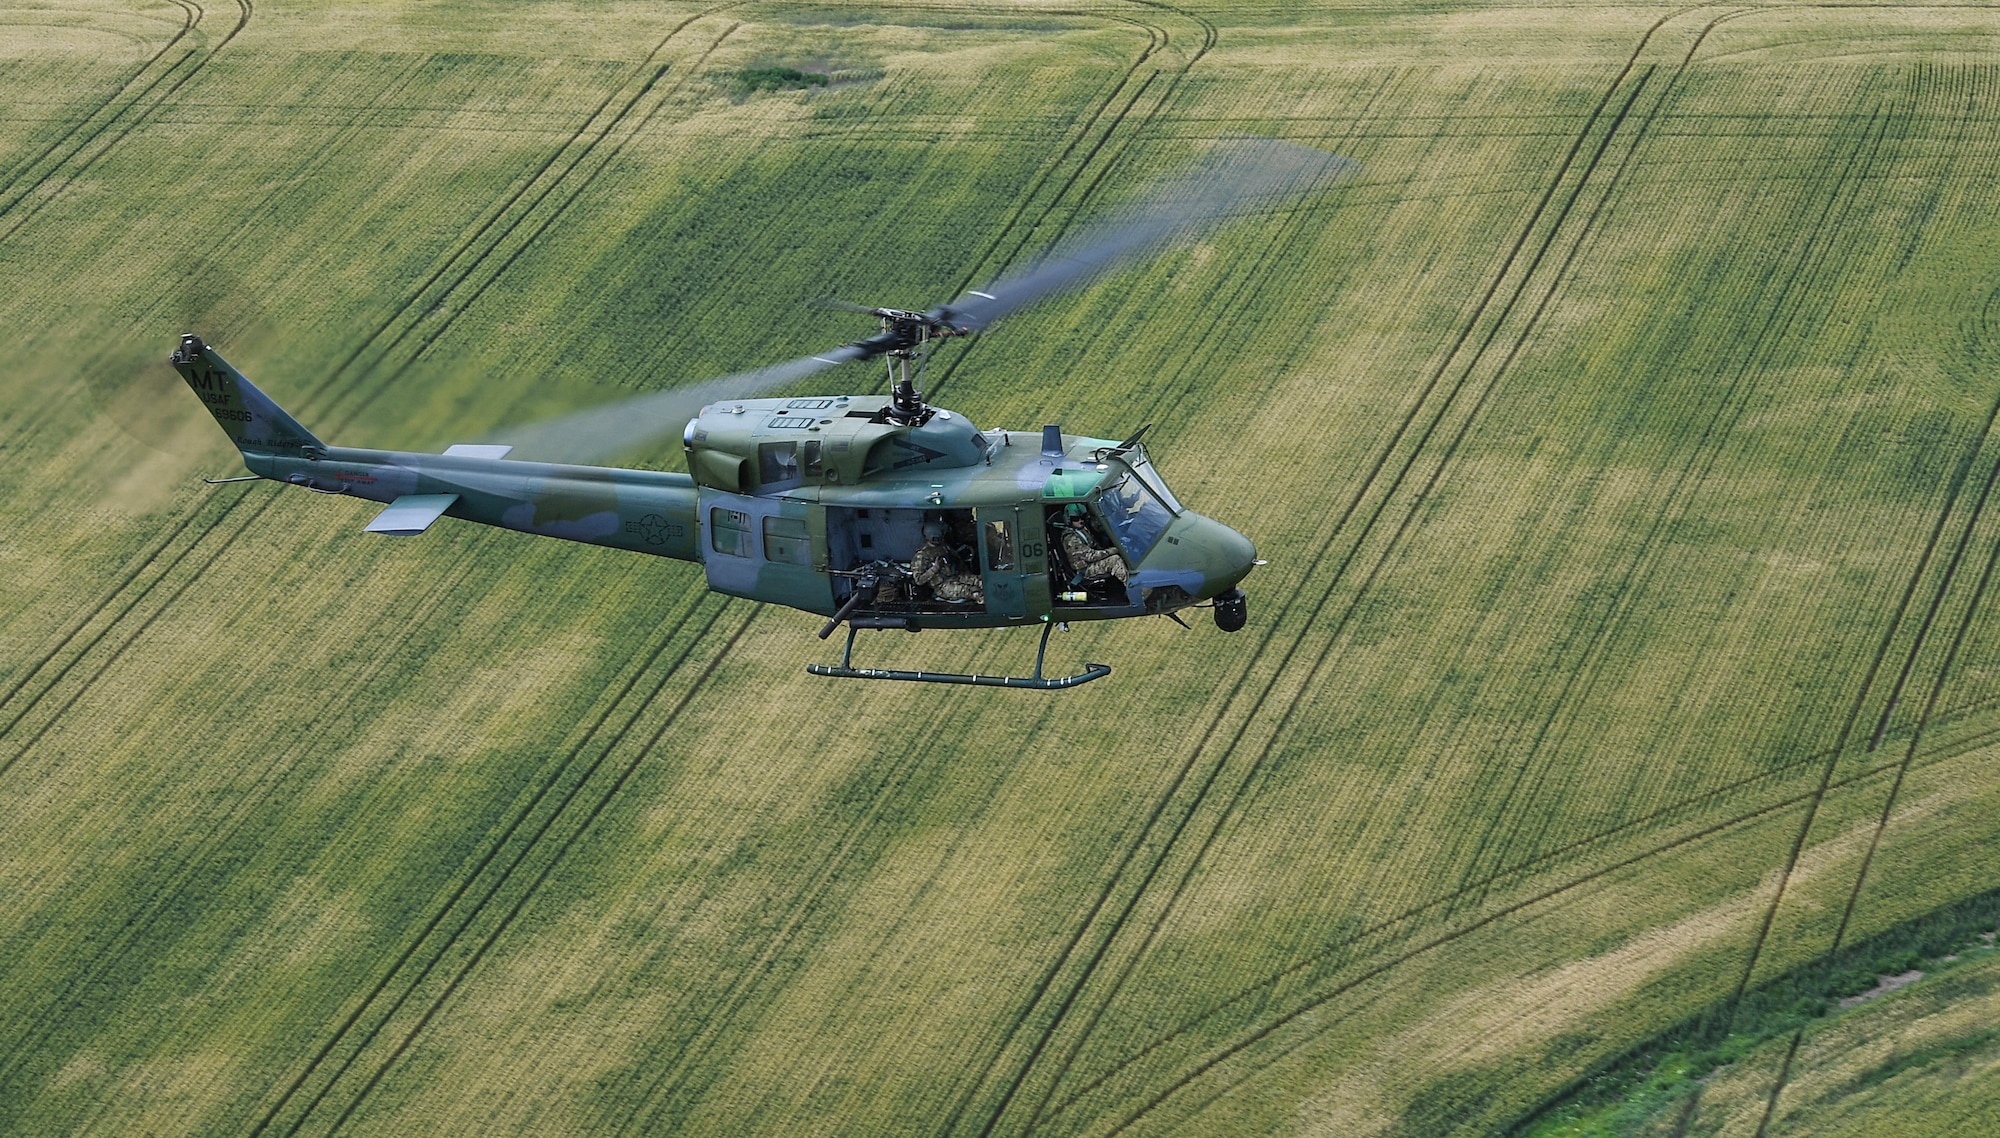 Members of the 54th Helicopter Squadron fly near Minot Air Force Base, North Dakota, July 26, 2018. Members of the unit provide convoy support, missile complex security and maintain aircrew flight proficiency. (U.S. Air Force photo by Senior Airman Jonathan McElderry)